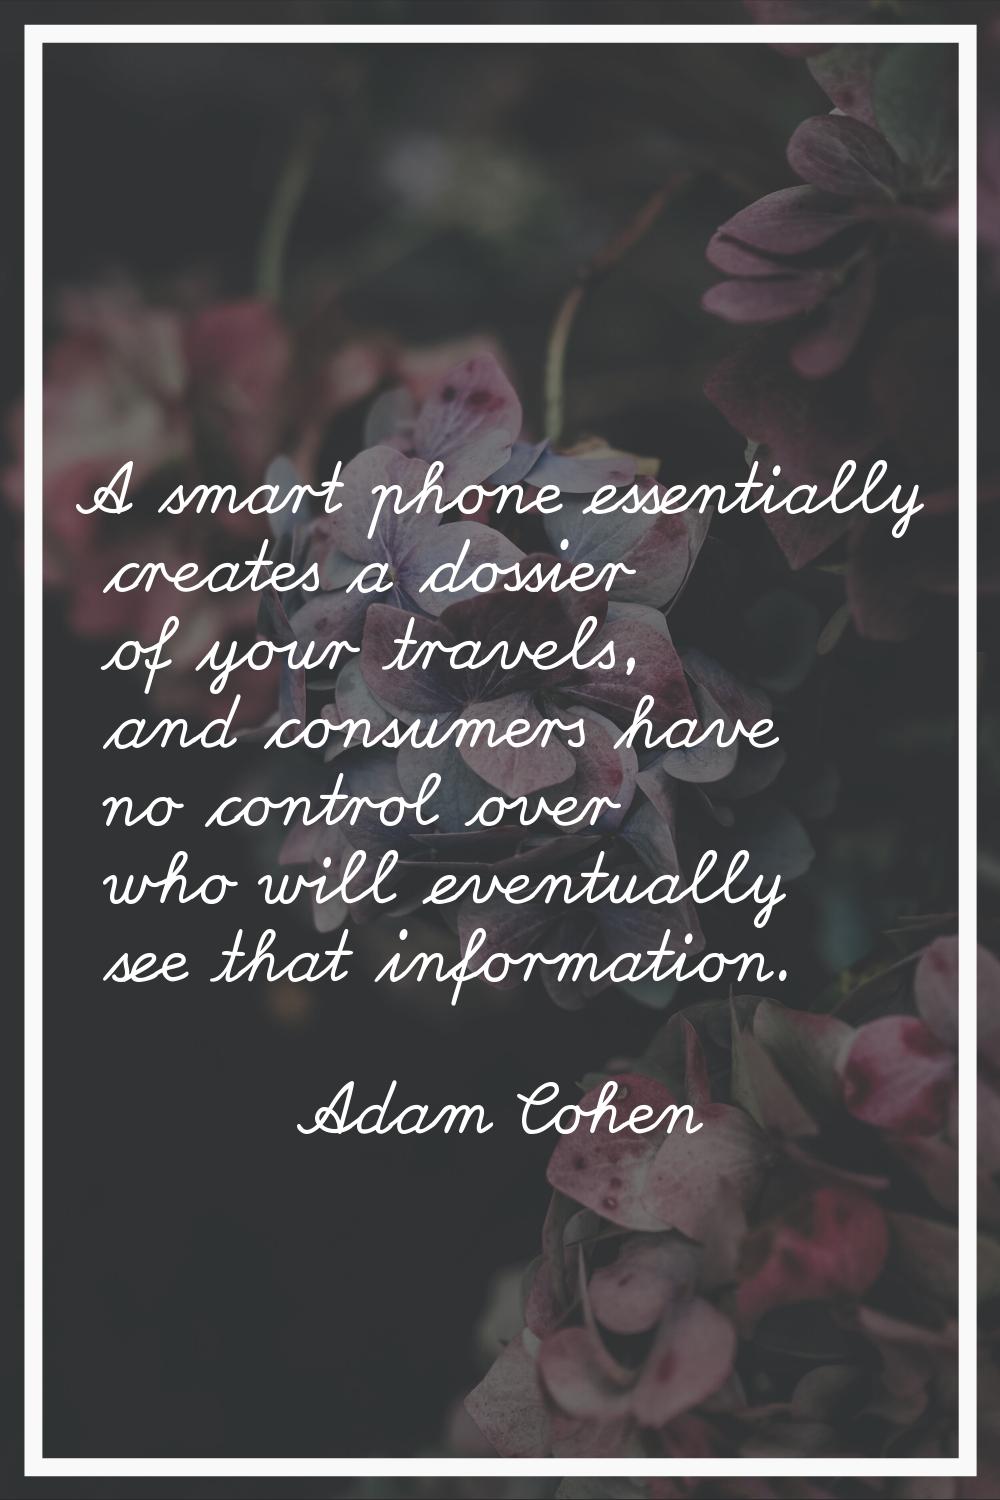 A smart phone essentially creates a dossier of your travels, and consumers have no control over who